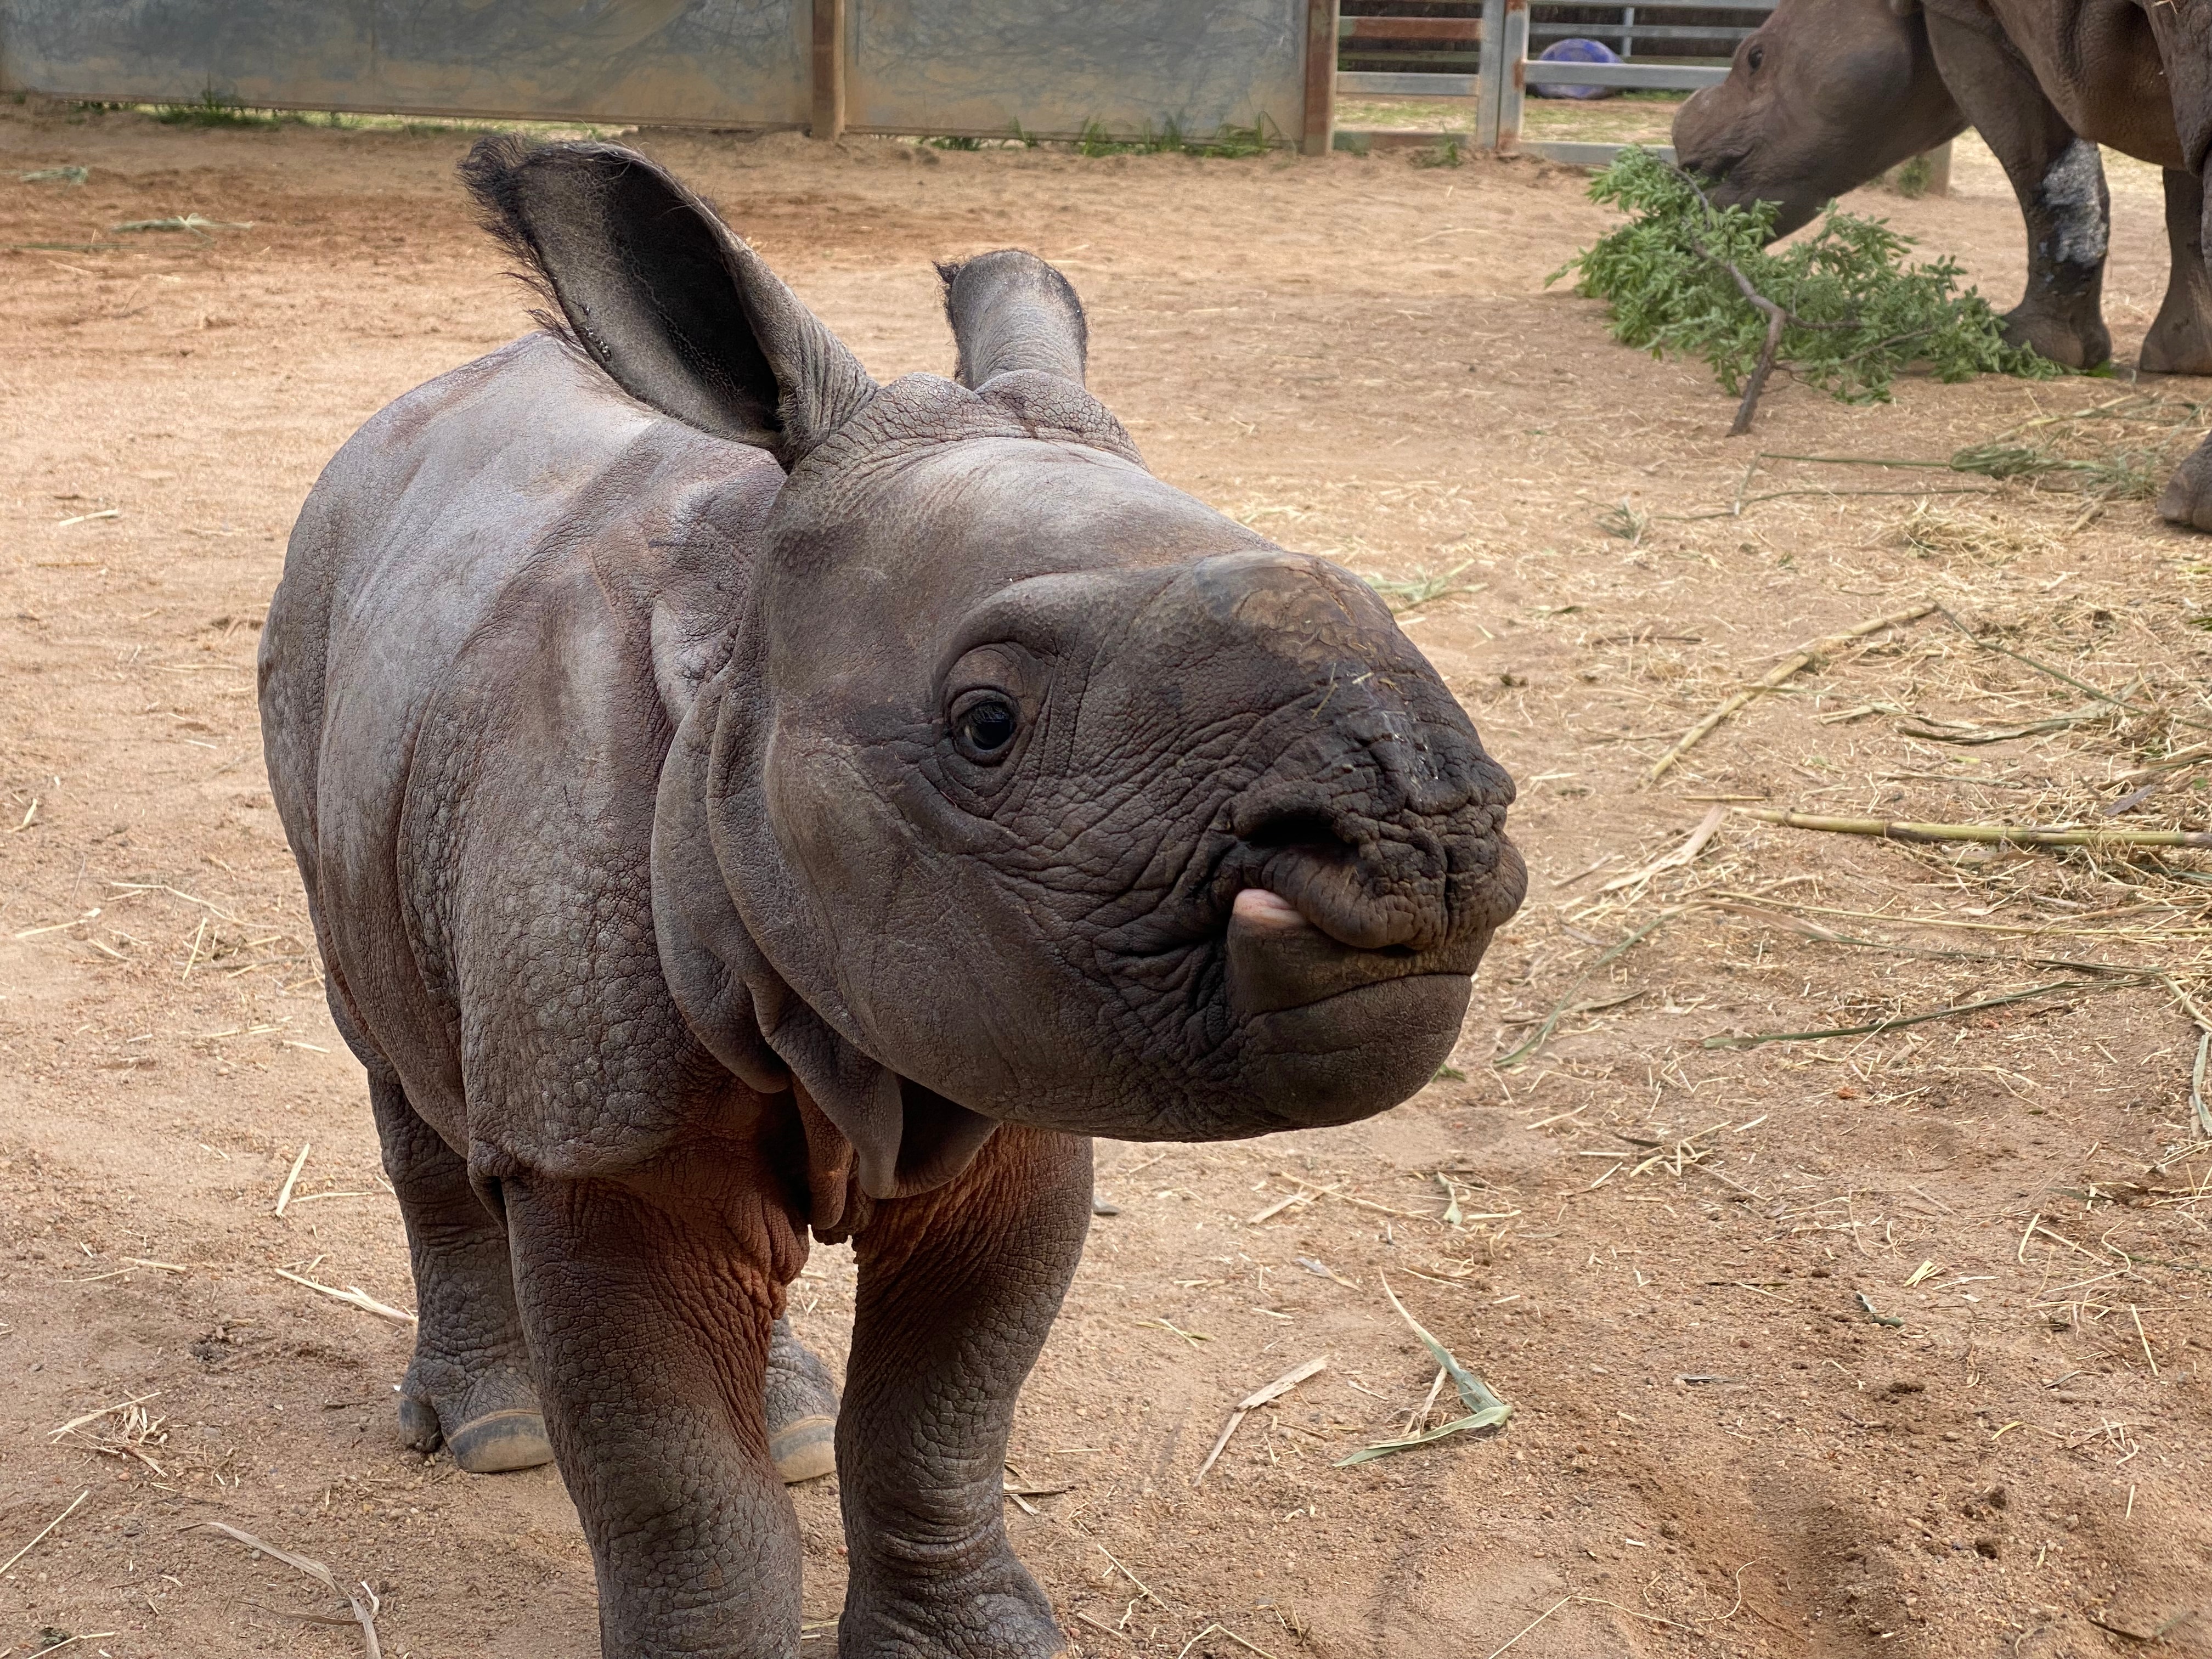 A small baby rhino looks up close to camera. An adult rhino is eating in the background